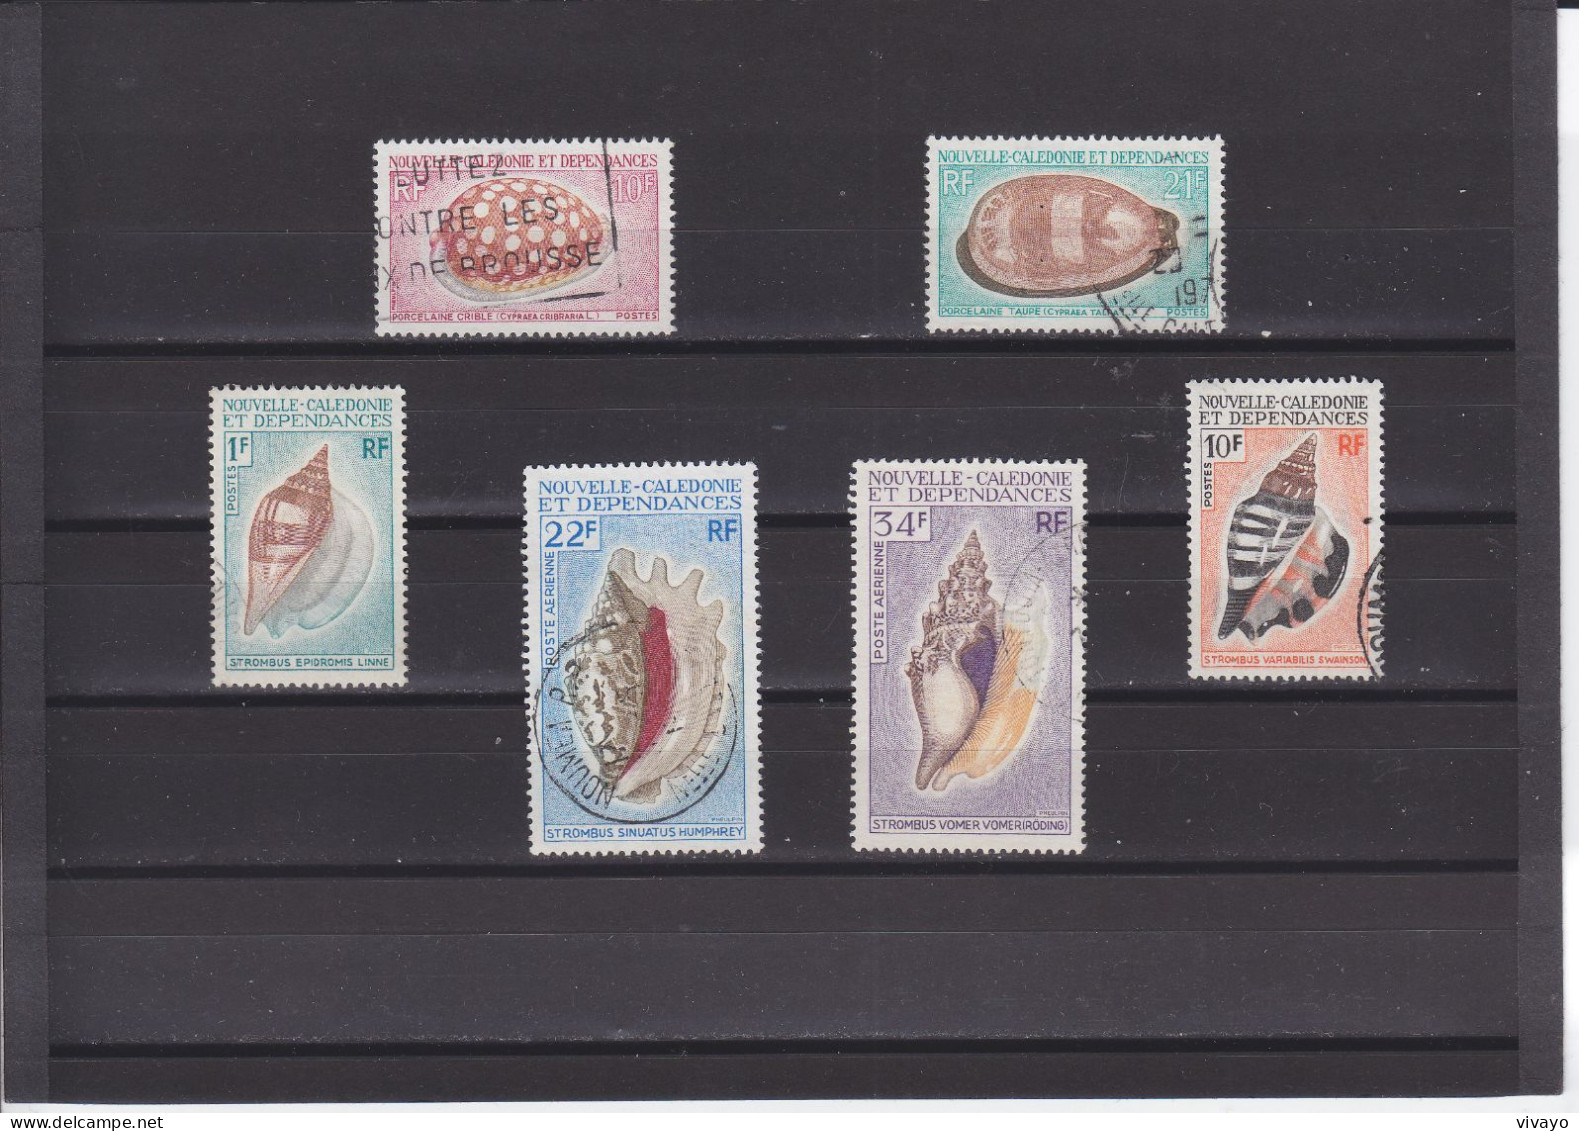 NOUVELLE CALEDONIE - O / FINE CANCELLED - 1970 - SHELLS - Yv. 368/71, PA. 113, 115  -  Mi. 486/7, 494/5, 496/7 - Gebraucht